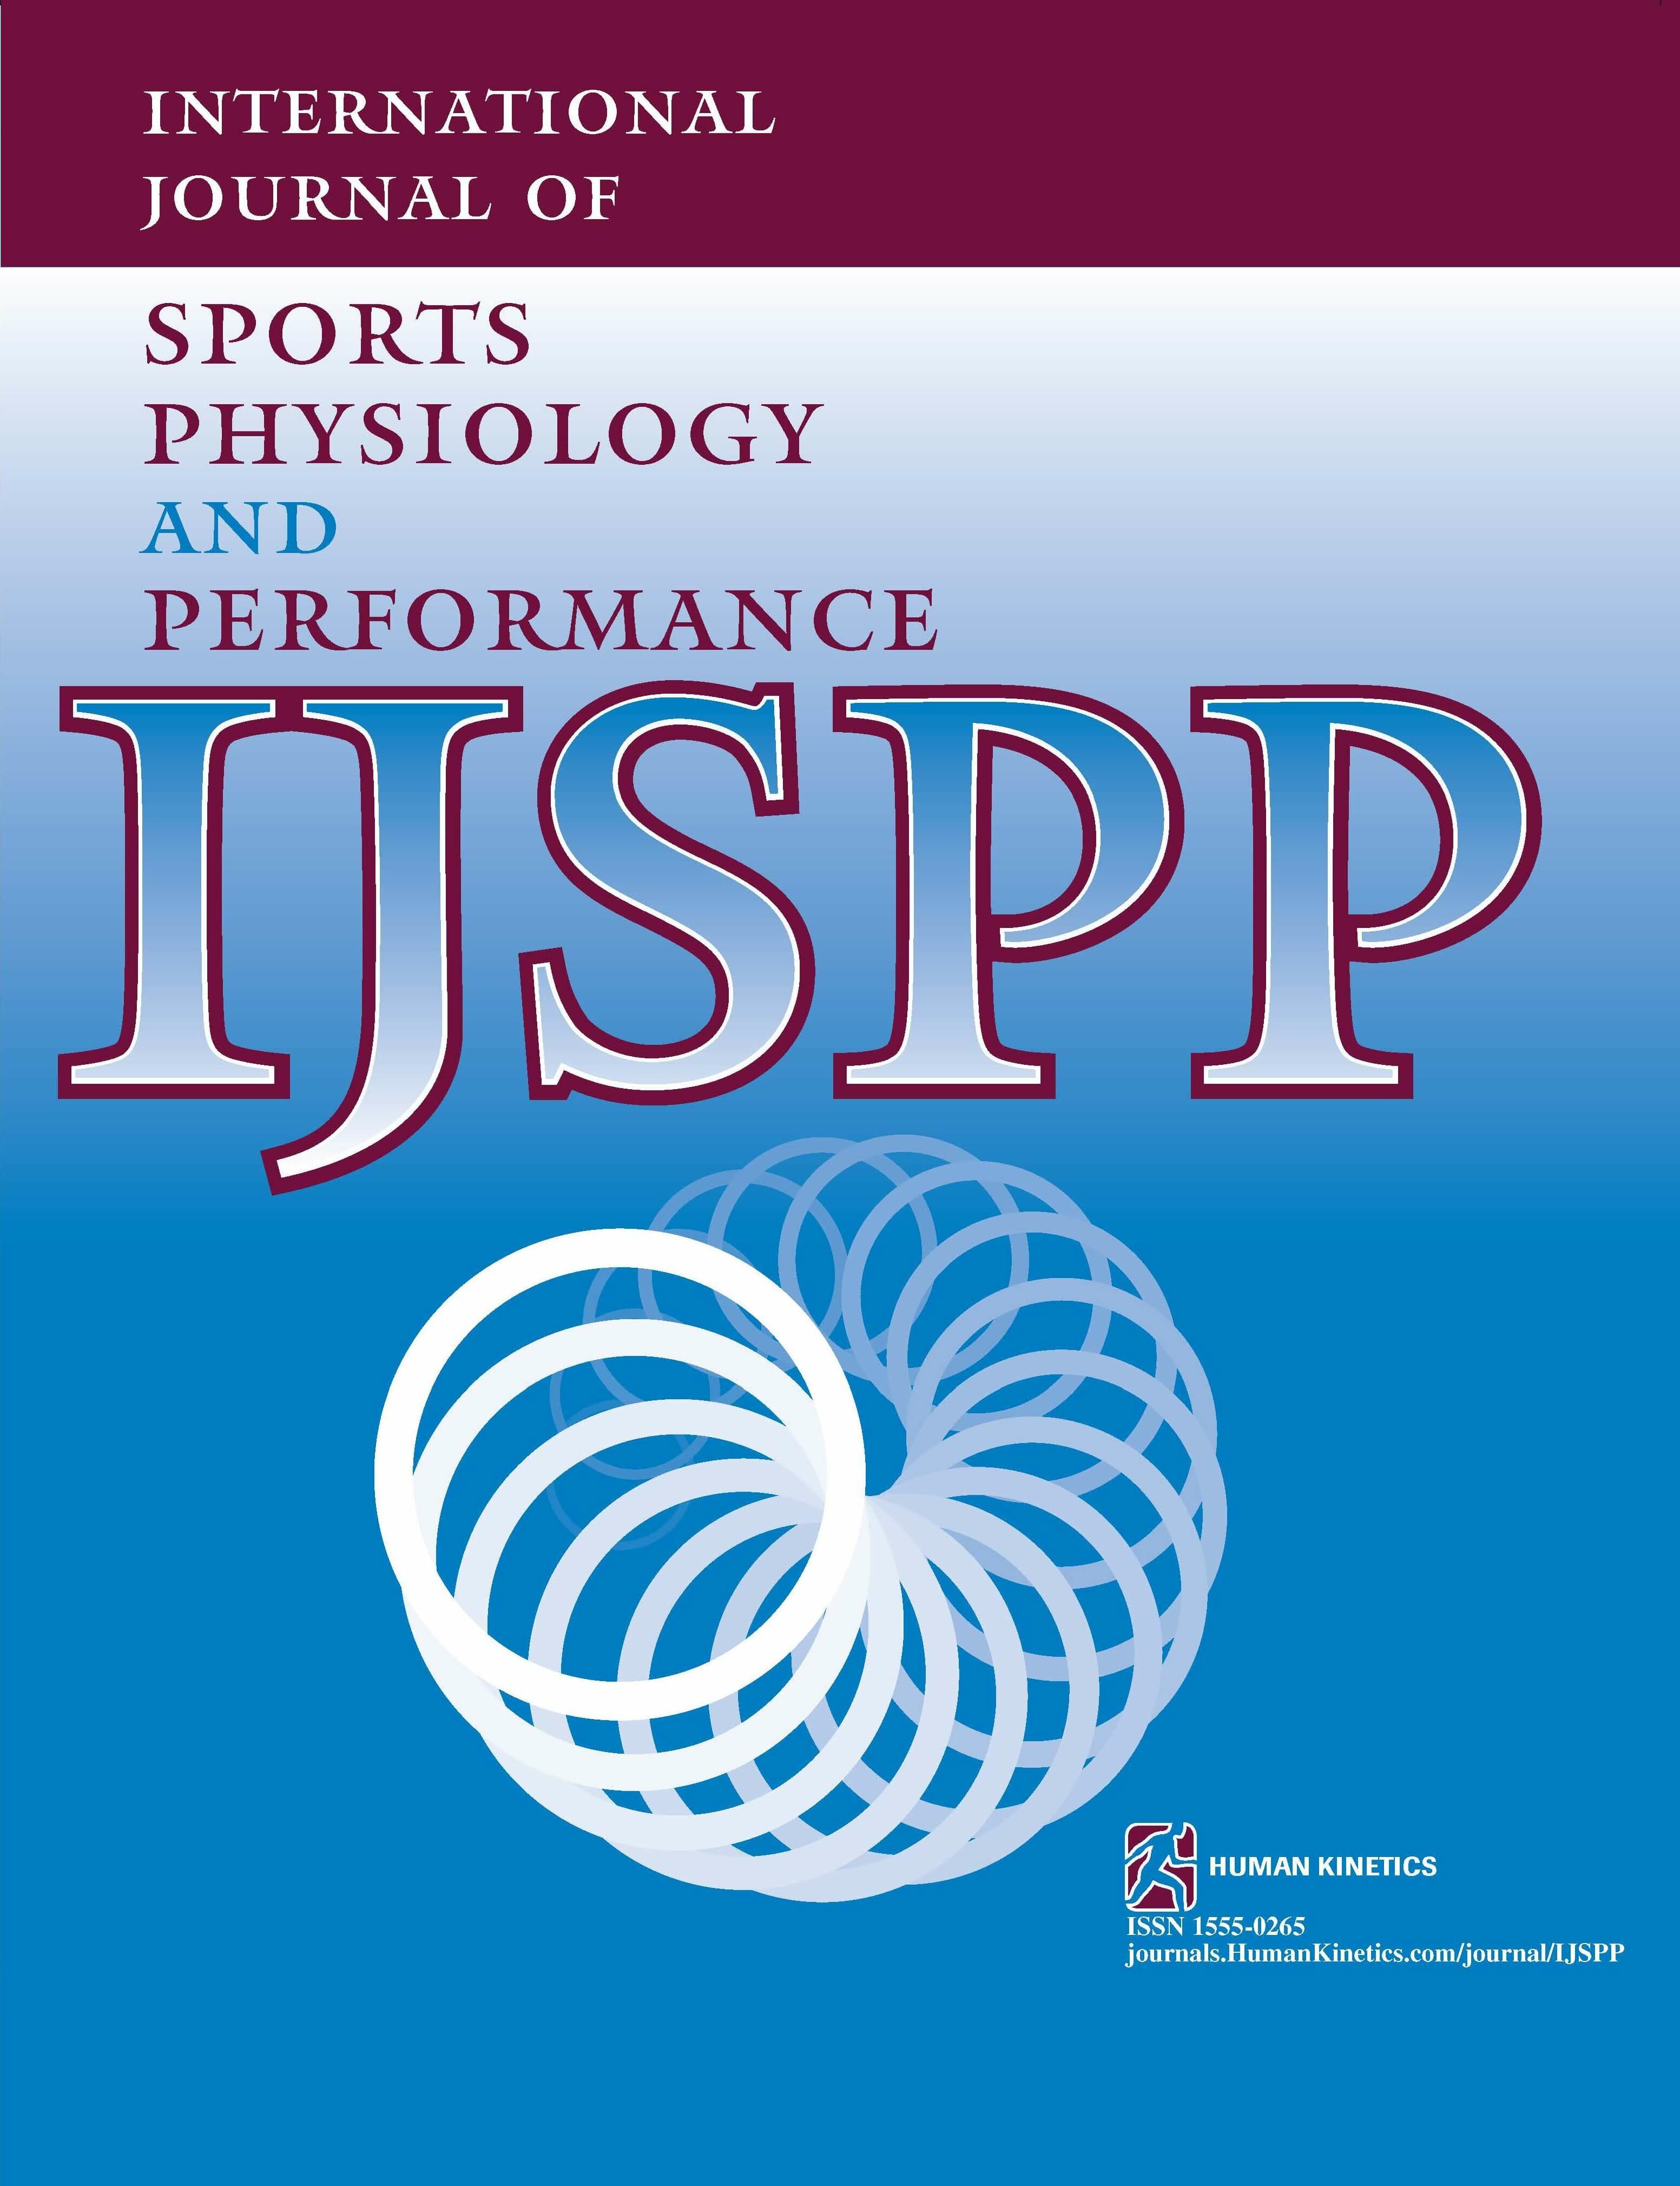 Simultaneous Upper- and Lower-Limb Postactivation Performance Enhancement After Clean and Jerk